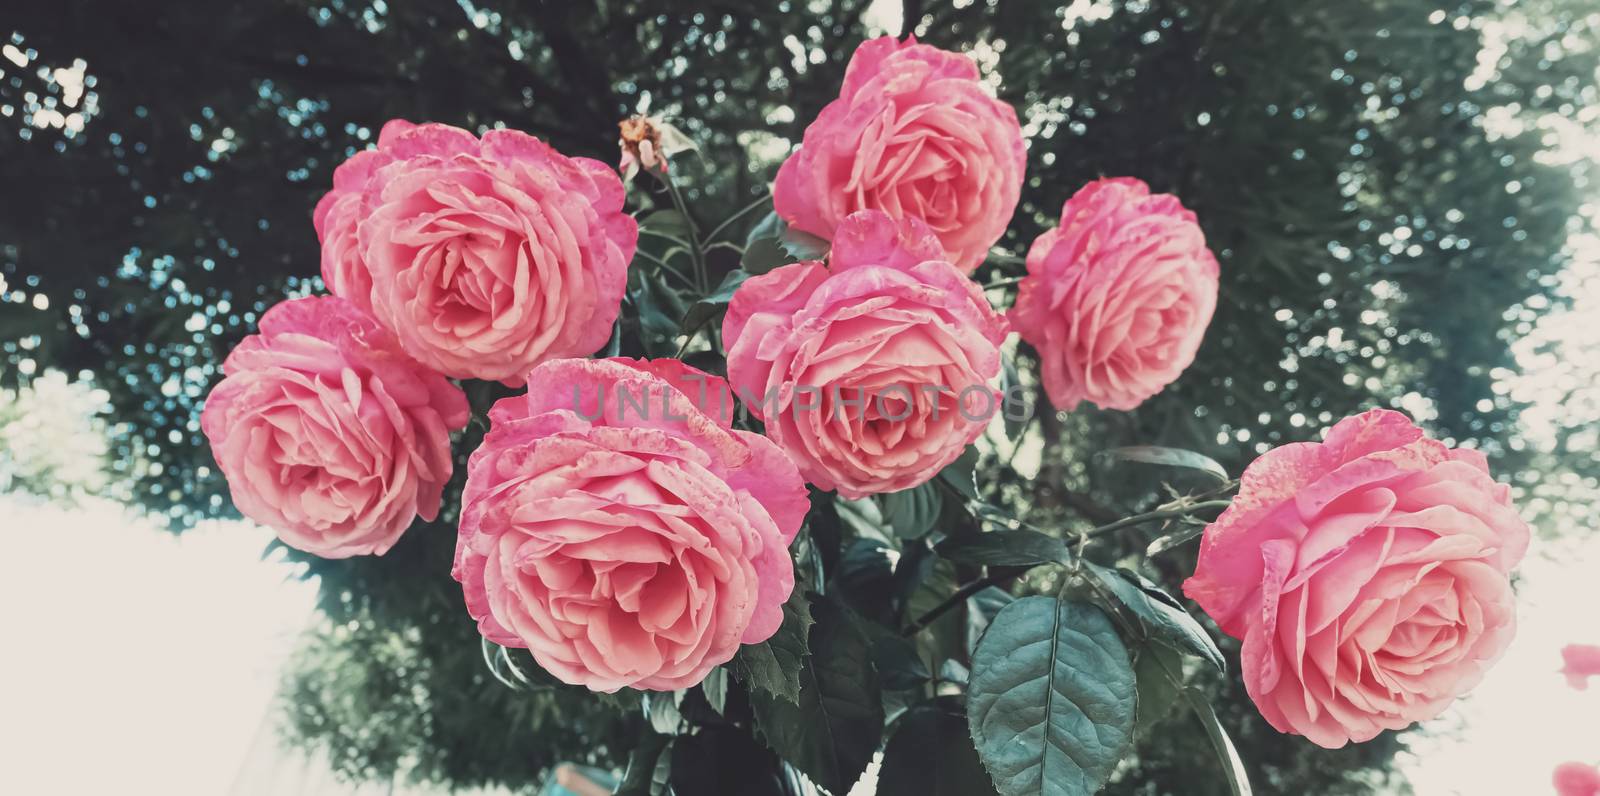 Beautiful wild pink roses in a city garden by Anneleven